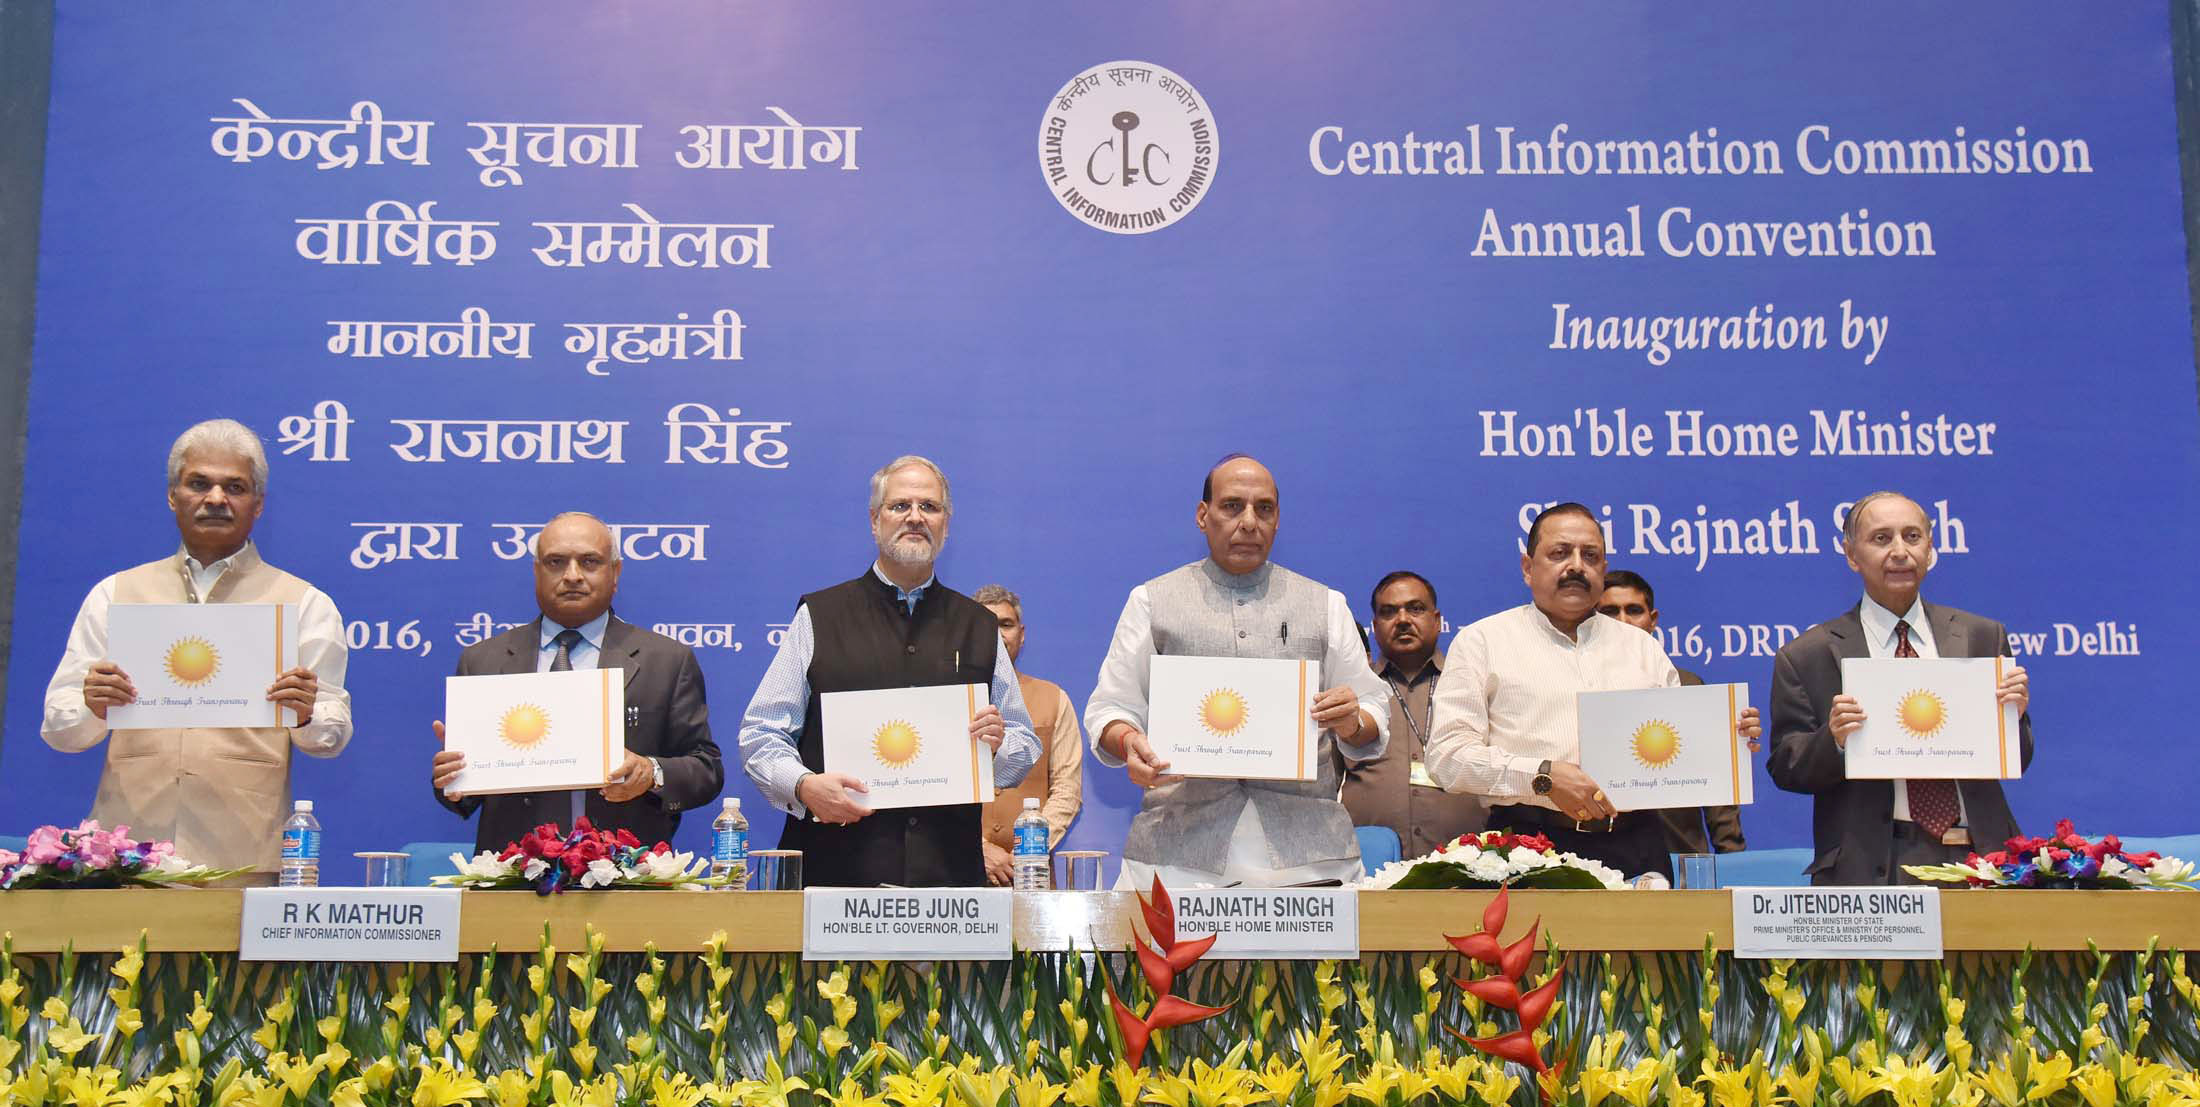 The Union Home Minister, Shri Rajnath Singh releasing the publication, at the inauguration of the 11th Annual Convention of Central Information Commission (CIC), in New Delhi on November 07, 2016. 	The Lt. Governor of Delhi, Shri Najeeb Jung, the Minister of State for Development of North Eastern Region (I/C), Prime Ministers Office, Personnel, Public Grievances & Pensions, Atomic Energy and Space, Dr. Jitendra Singh, the Chief Information Commissioner, Shri R.K. Mathur and other dignitaries are also seen.